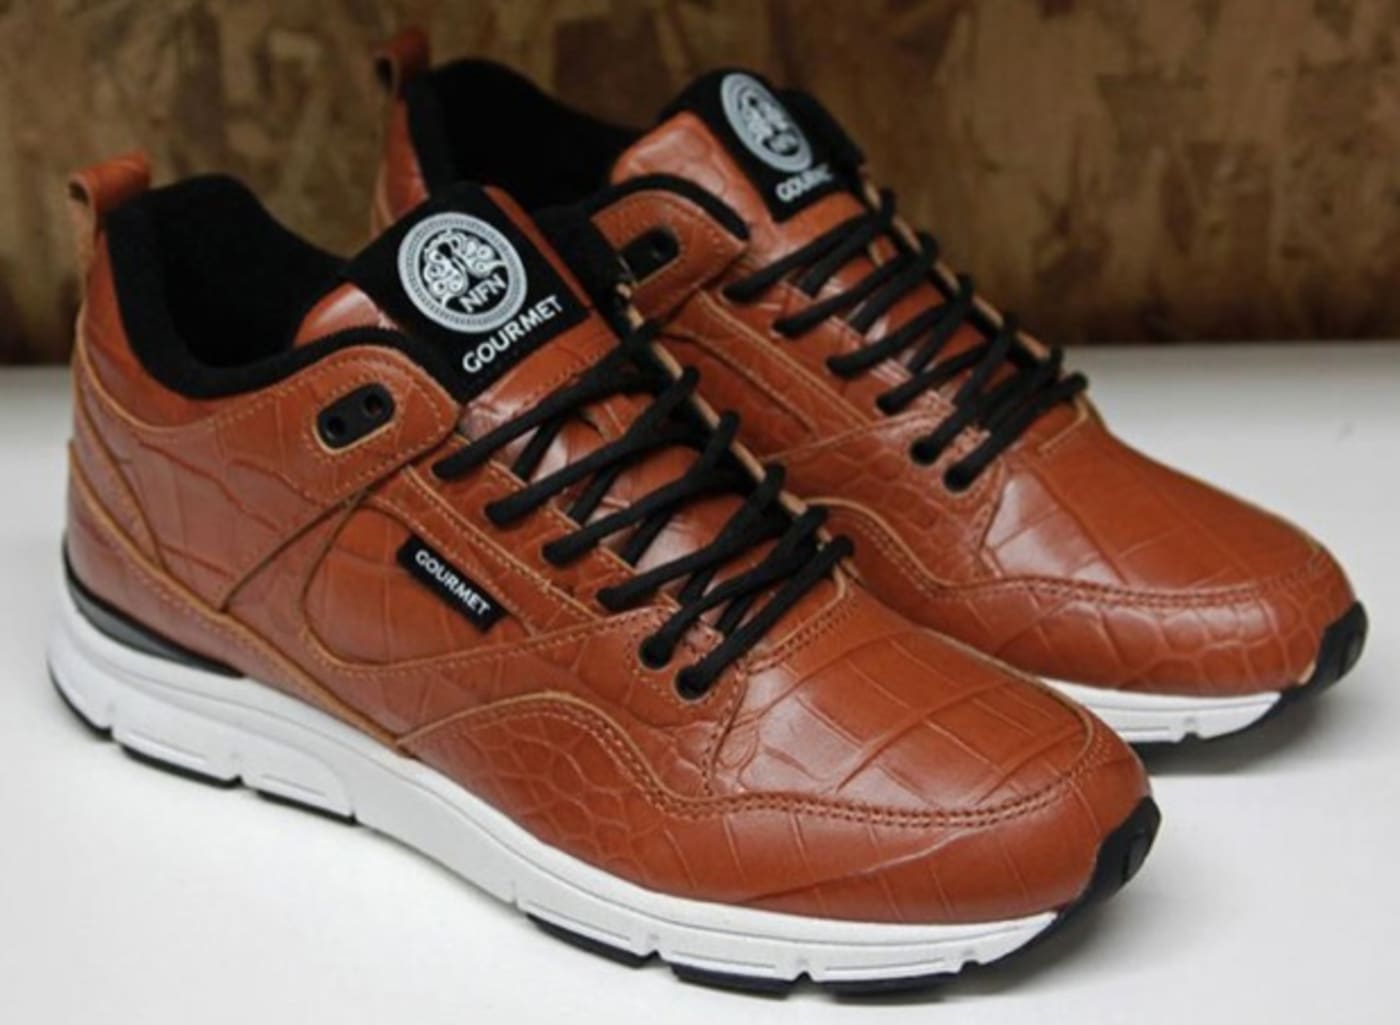 Gourmet The 35 LX “Brown | Complex